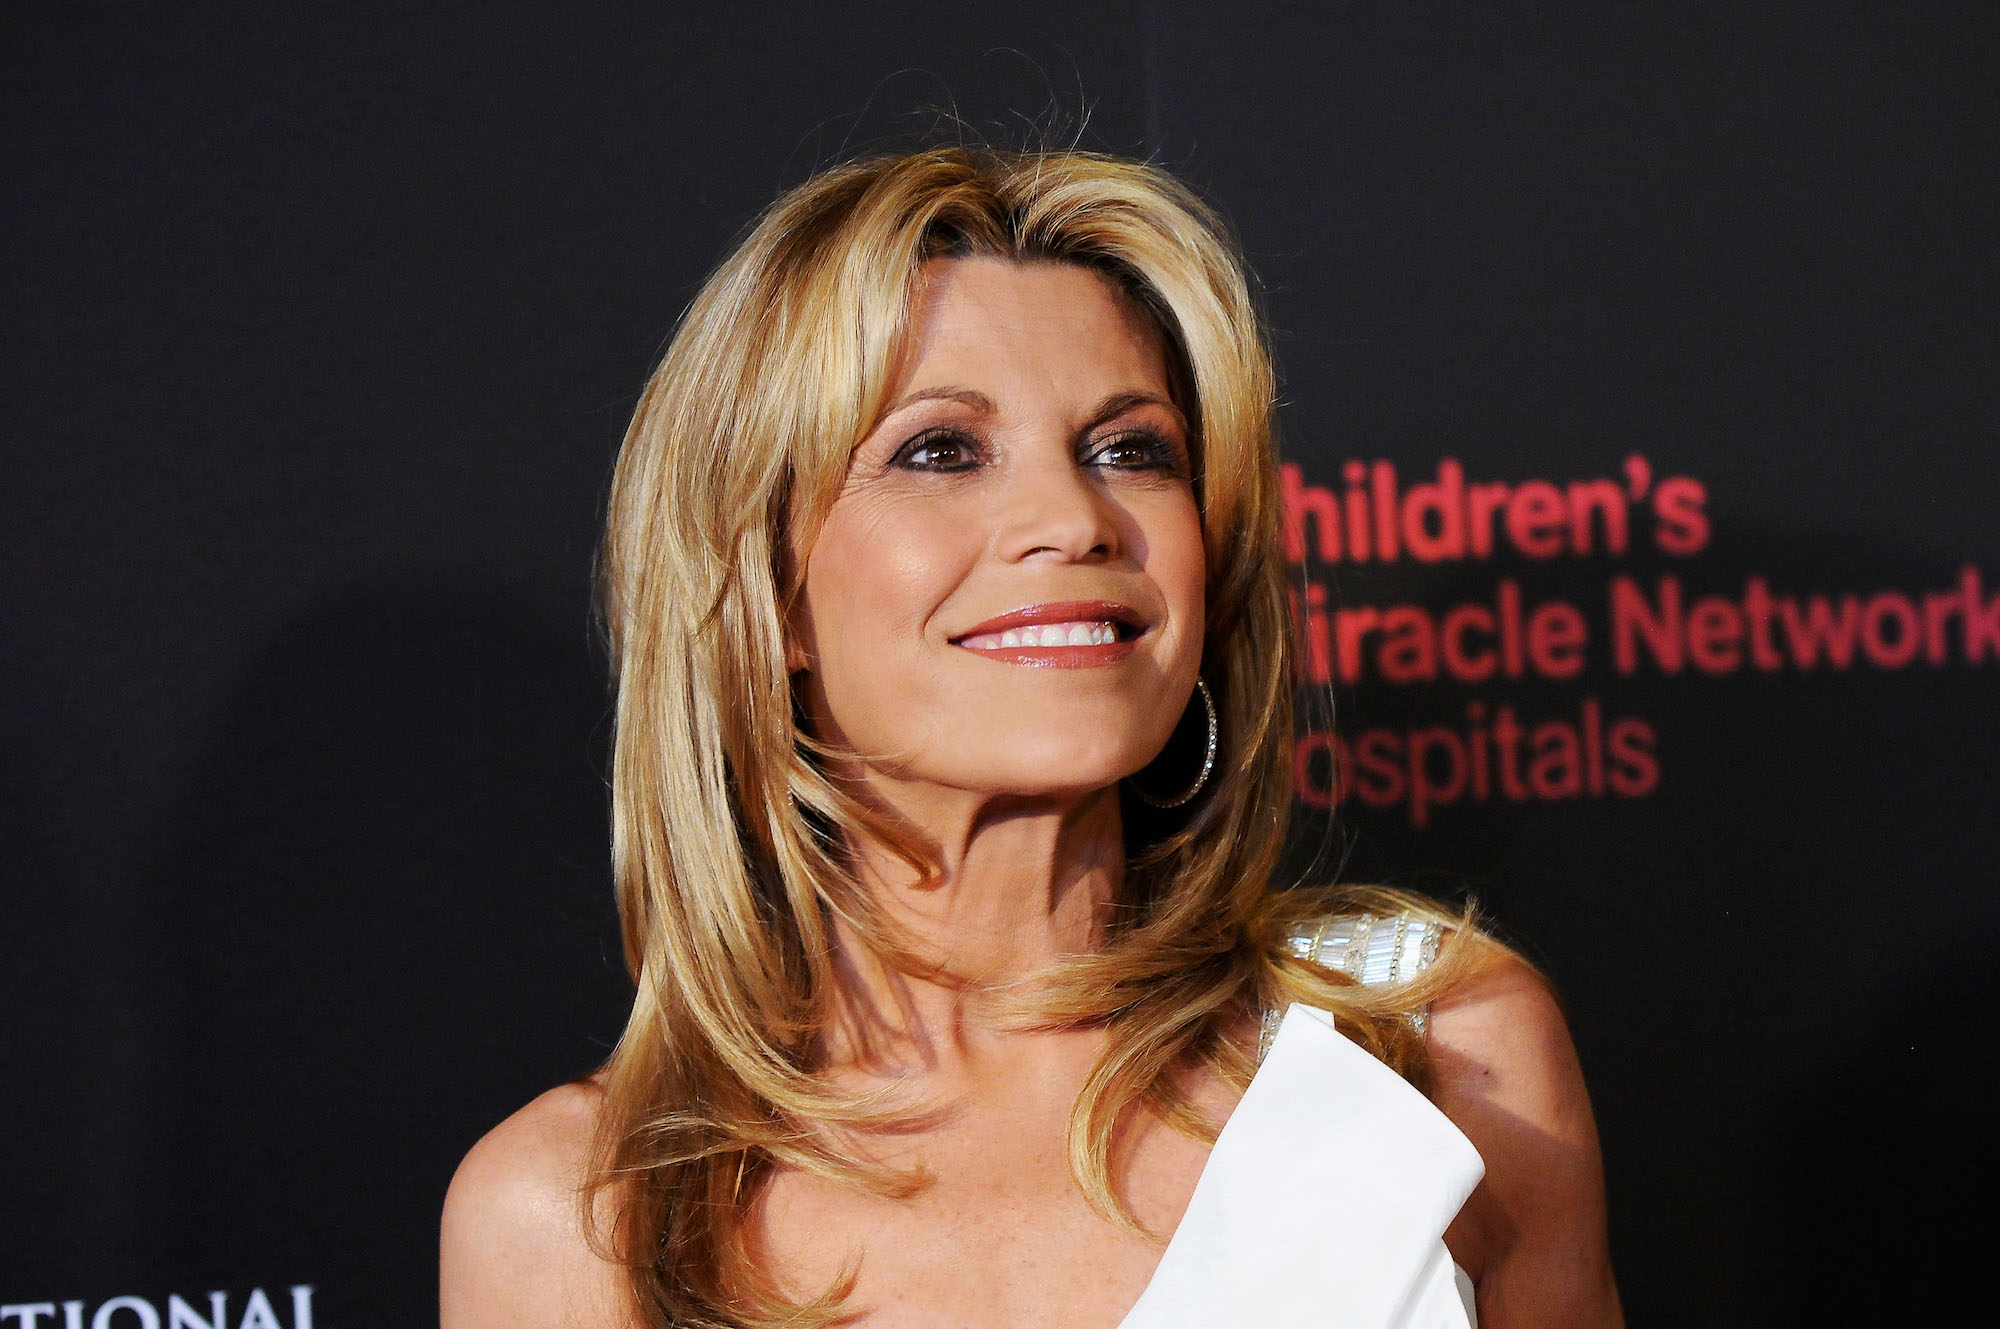 Vanna White smiling in front of a black background, looking up